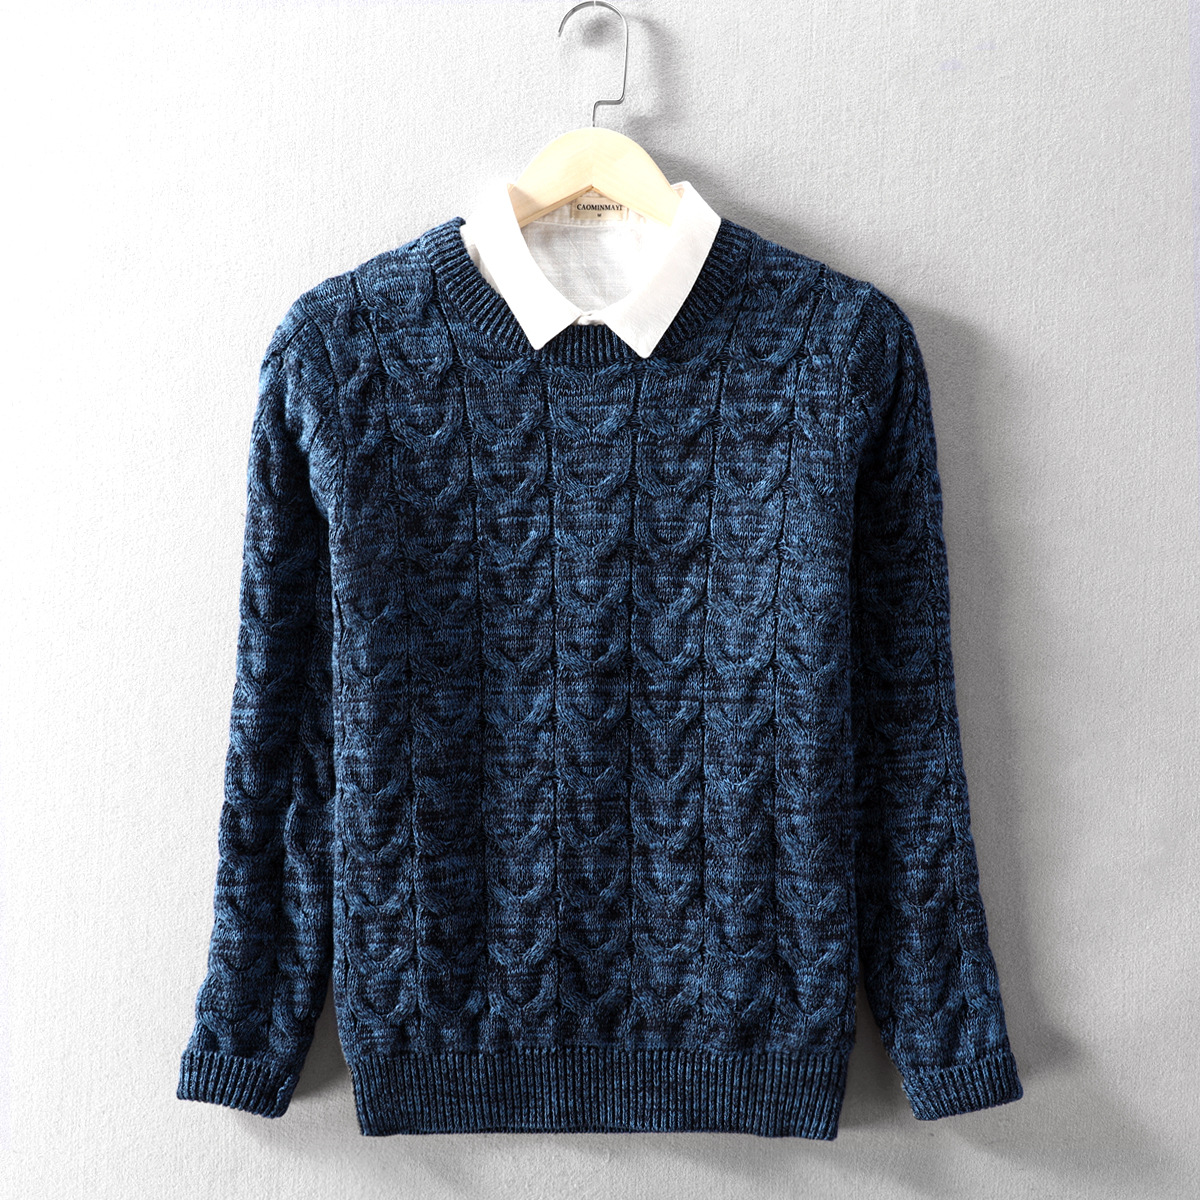 2020 autumn and winter new men's knit sw...